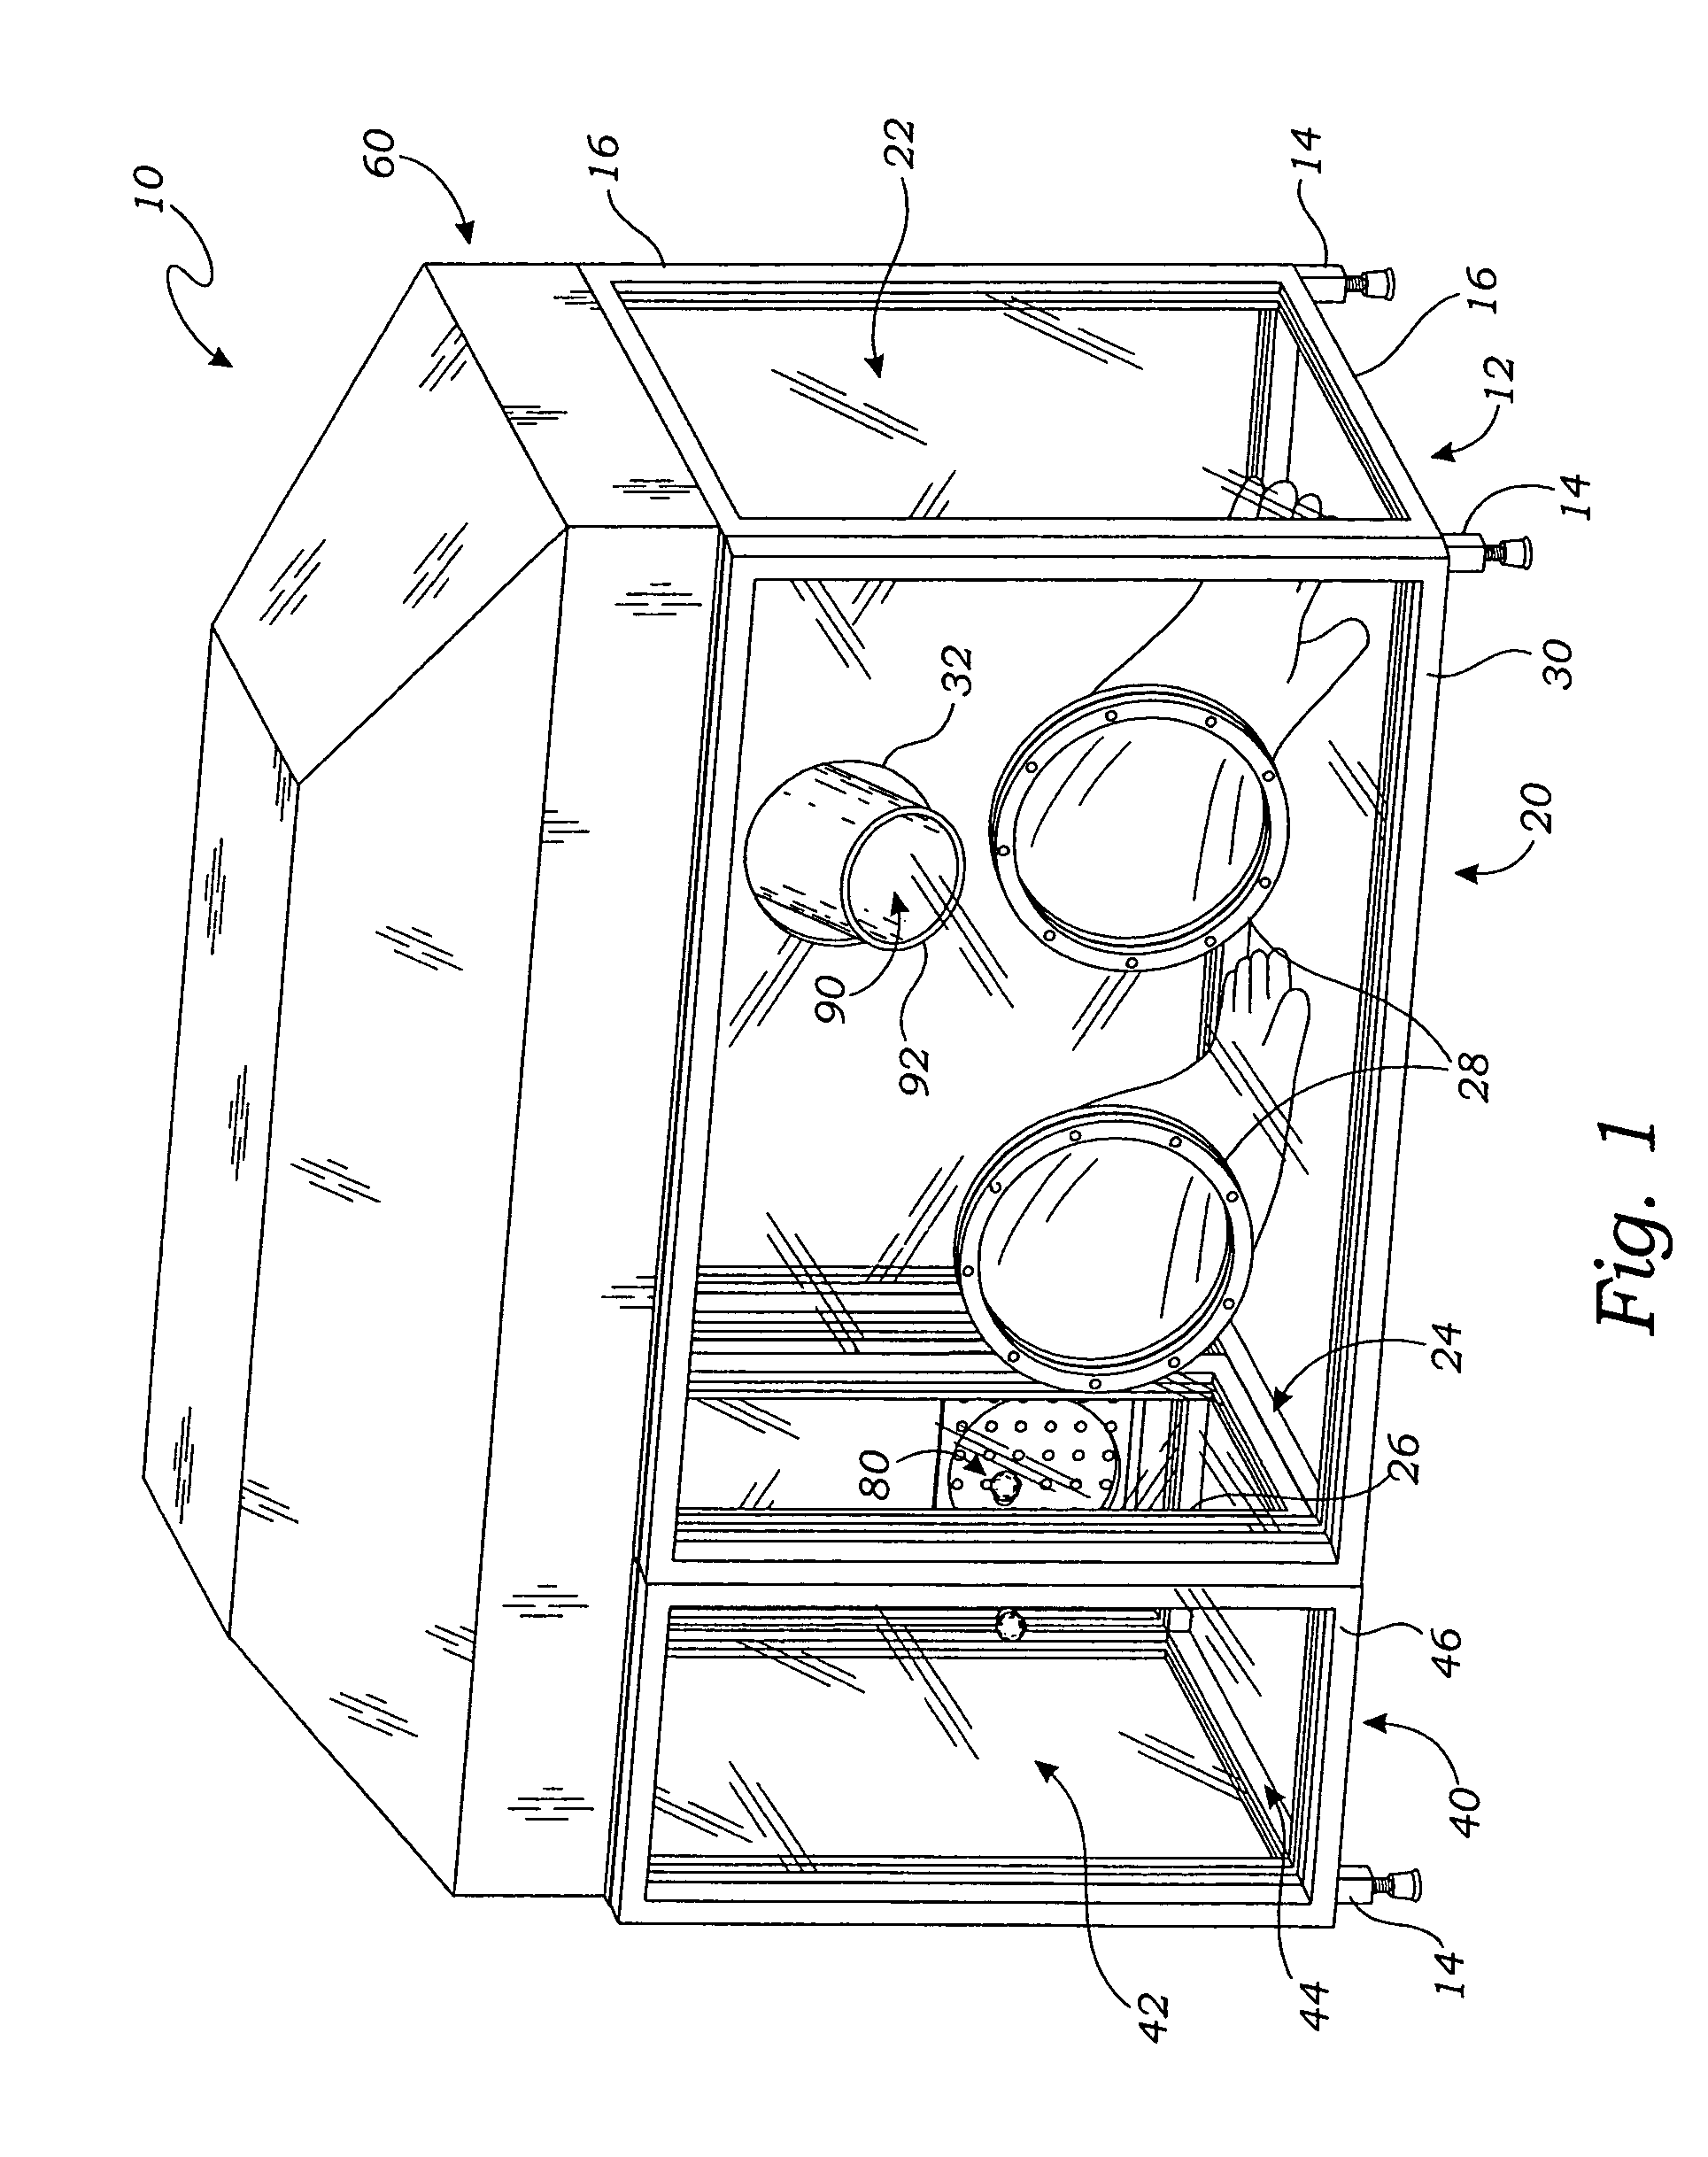 Portable clean molding apparatus and method of use